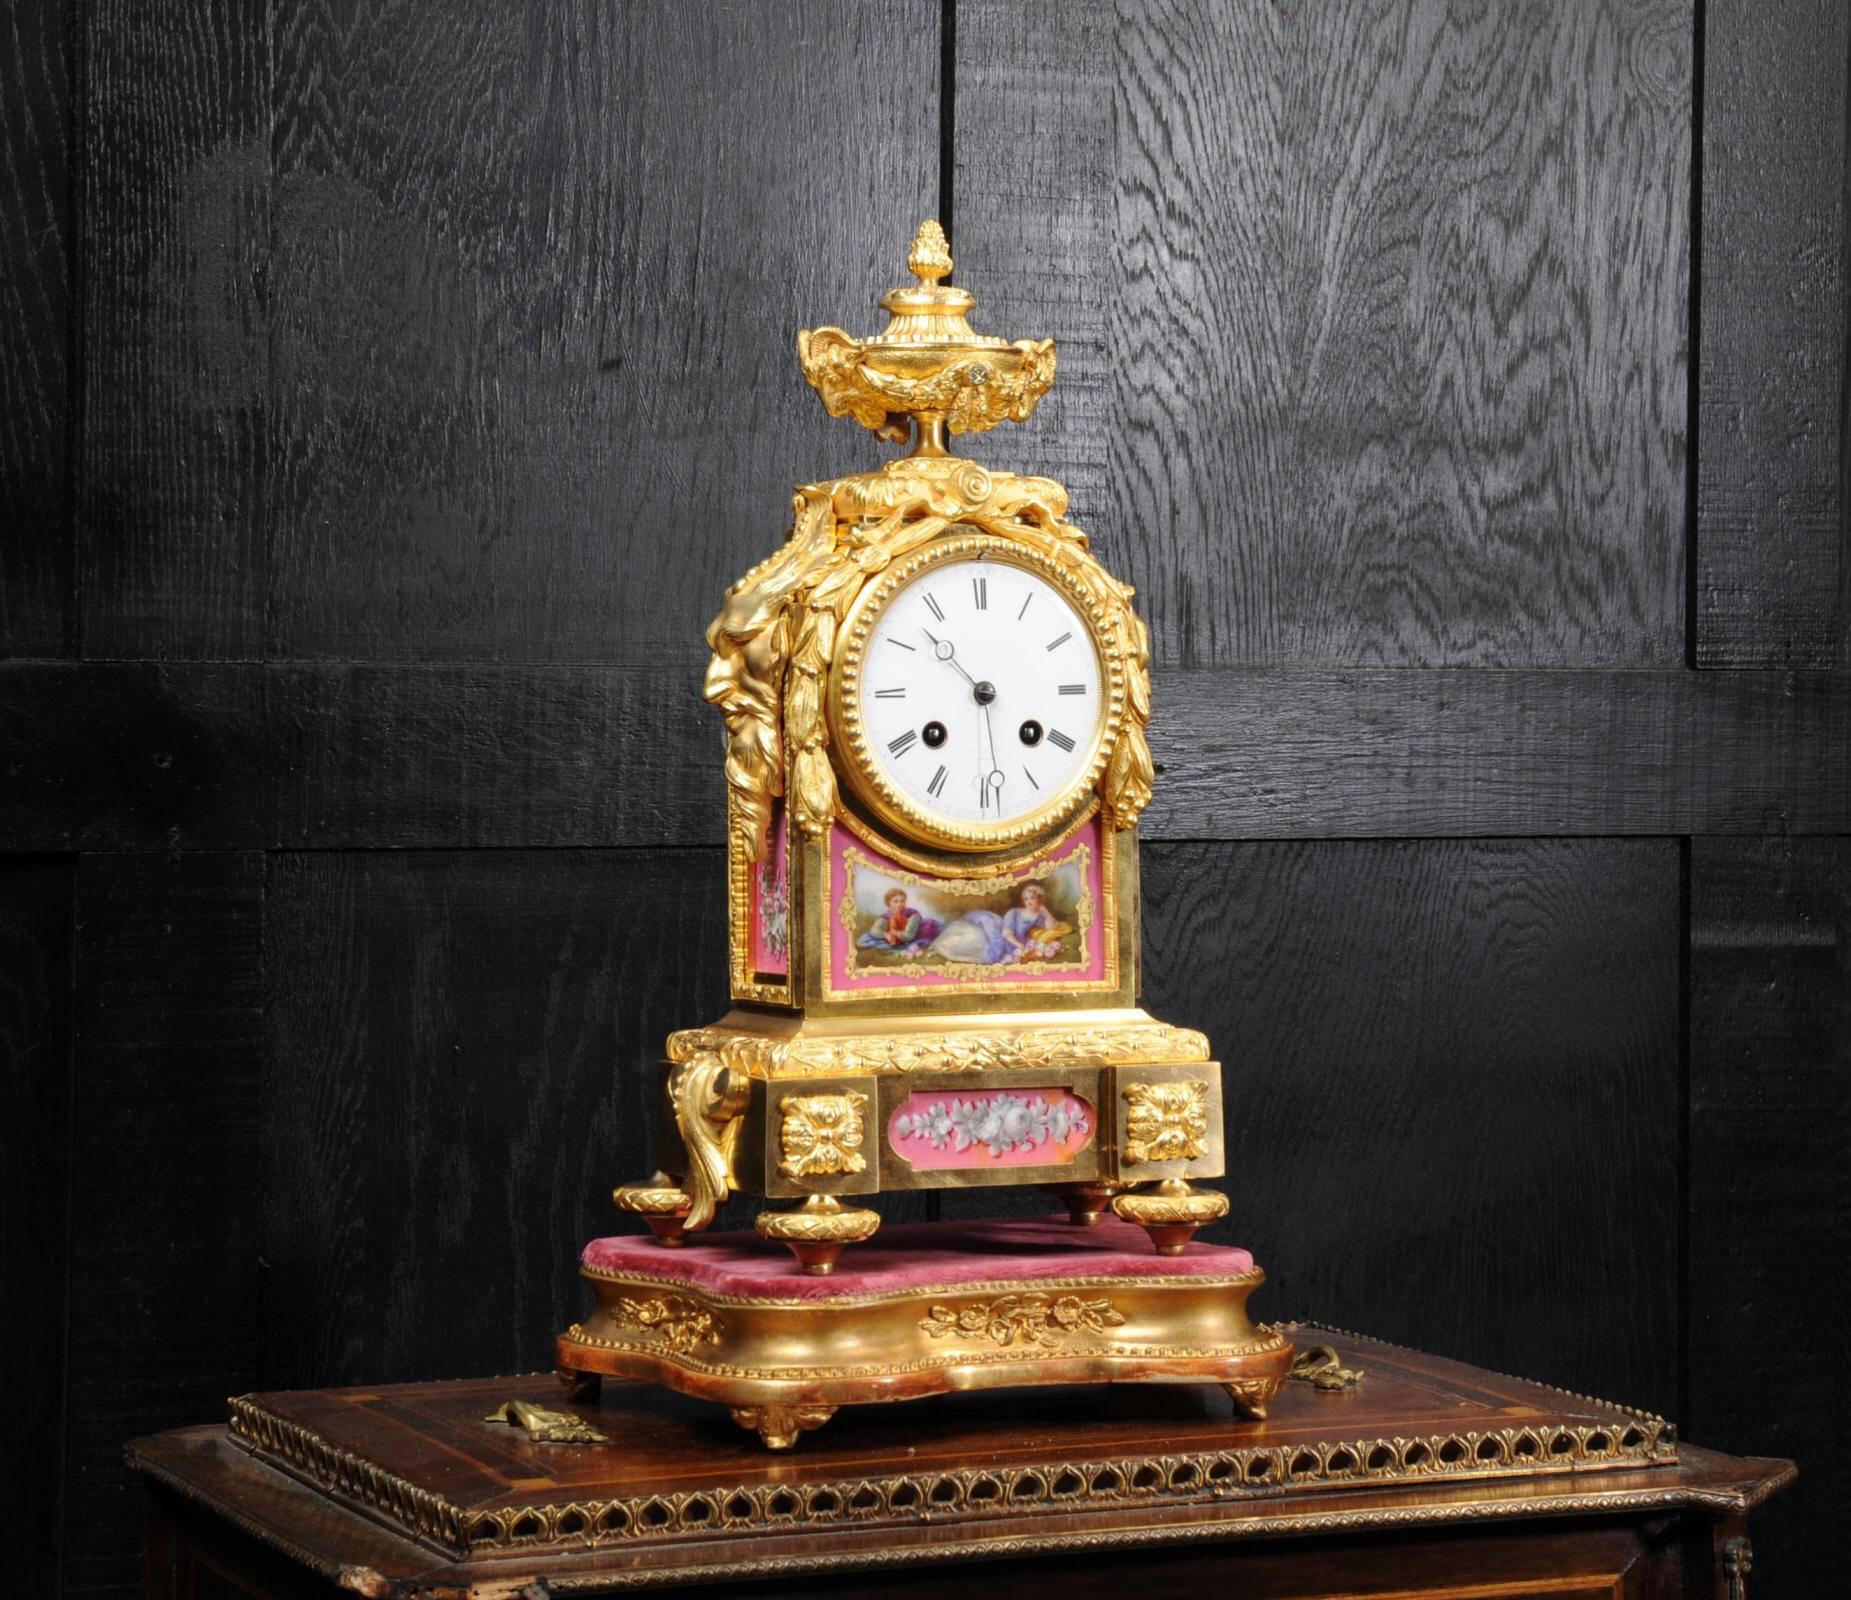 A fine and early clock by Raingo Frères Paris. It is beautifully made in ormolu (fire gilded or bronze doré) and mounted with exquisite Sèvres style porcelain with Pompadour Rose ground. The panel below the dial features a charming scene of a couple